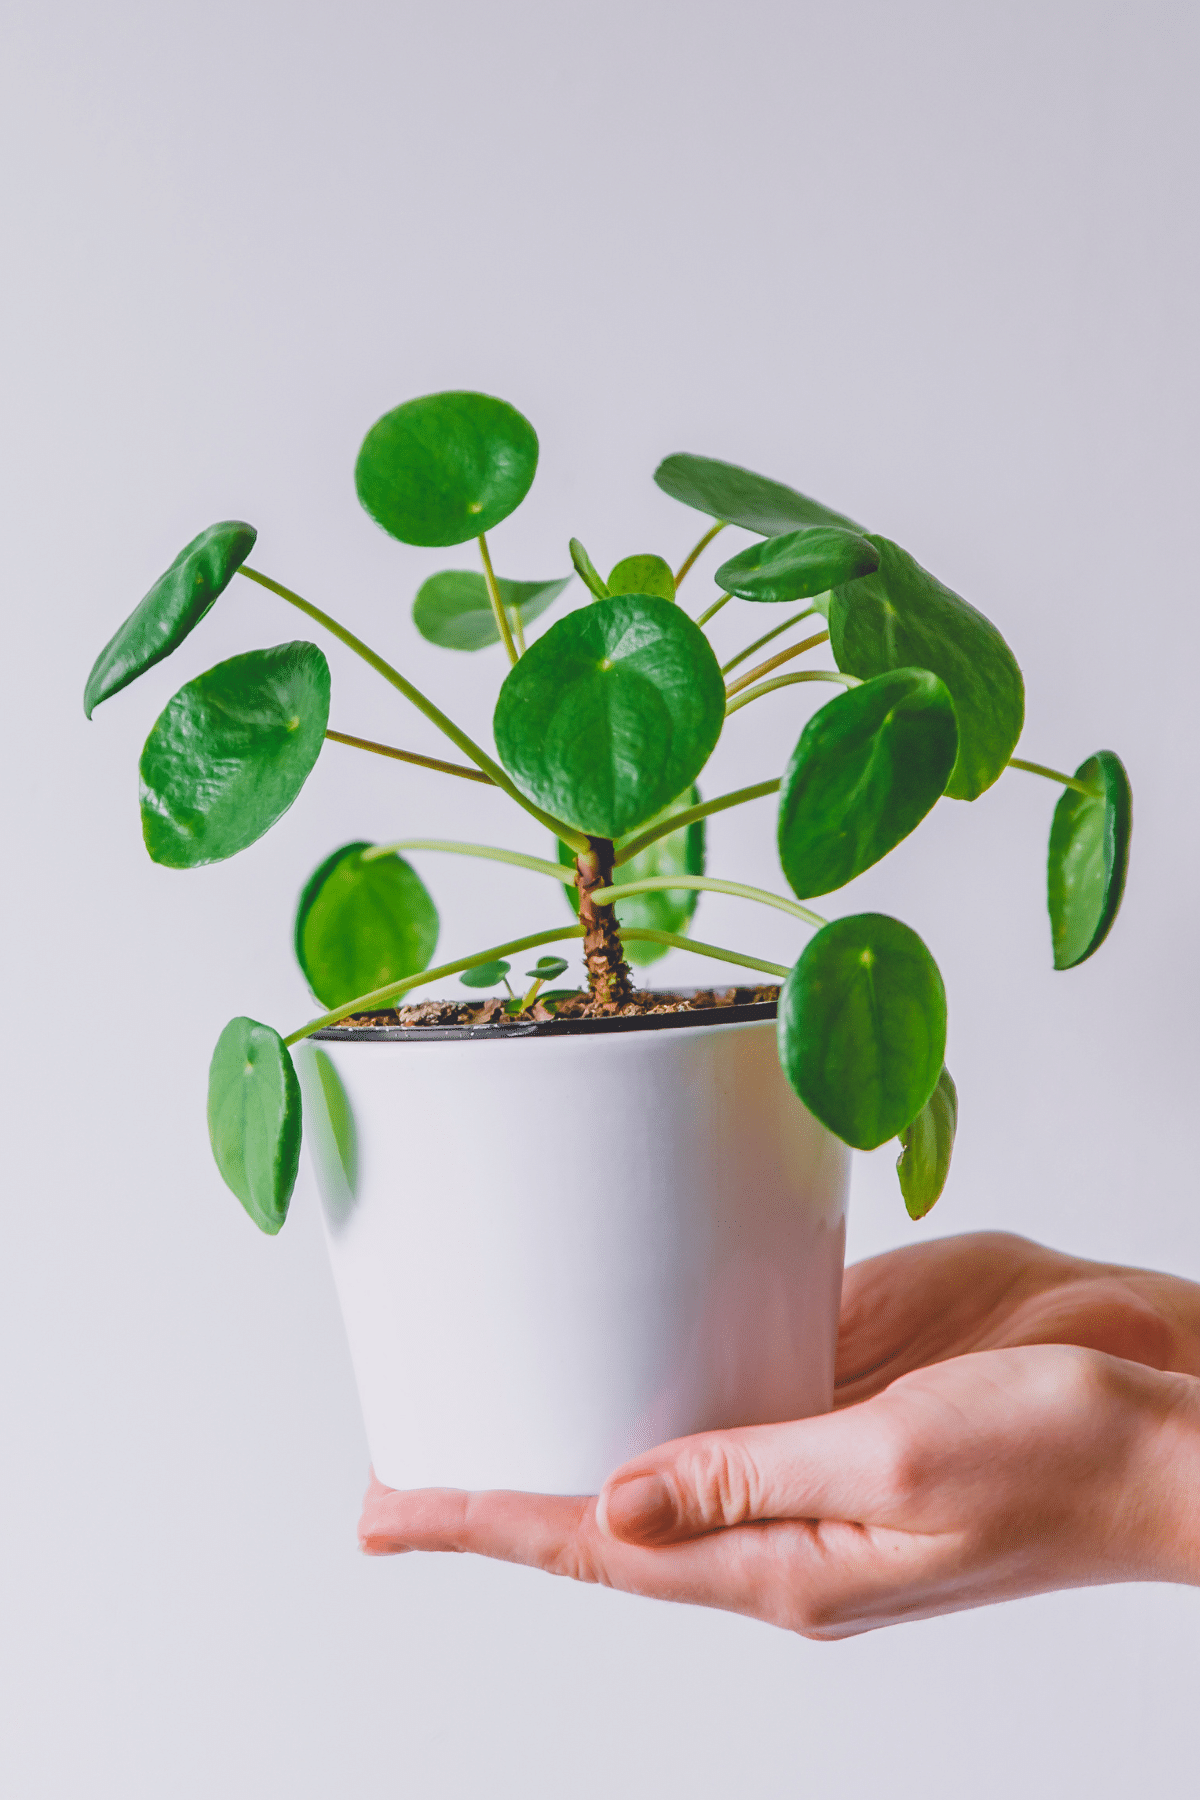 Hands holding Chinese money plant in a white pot.